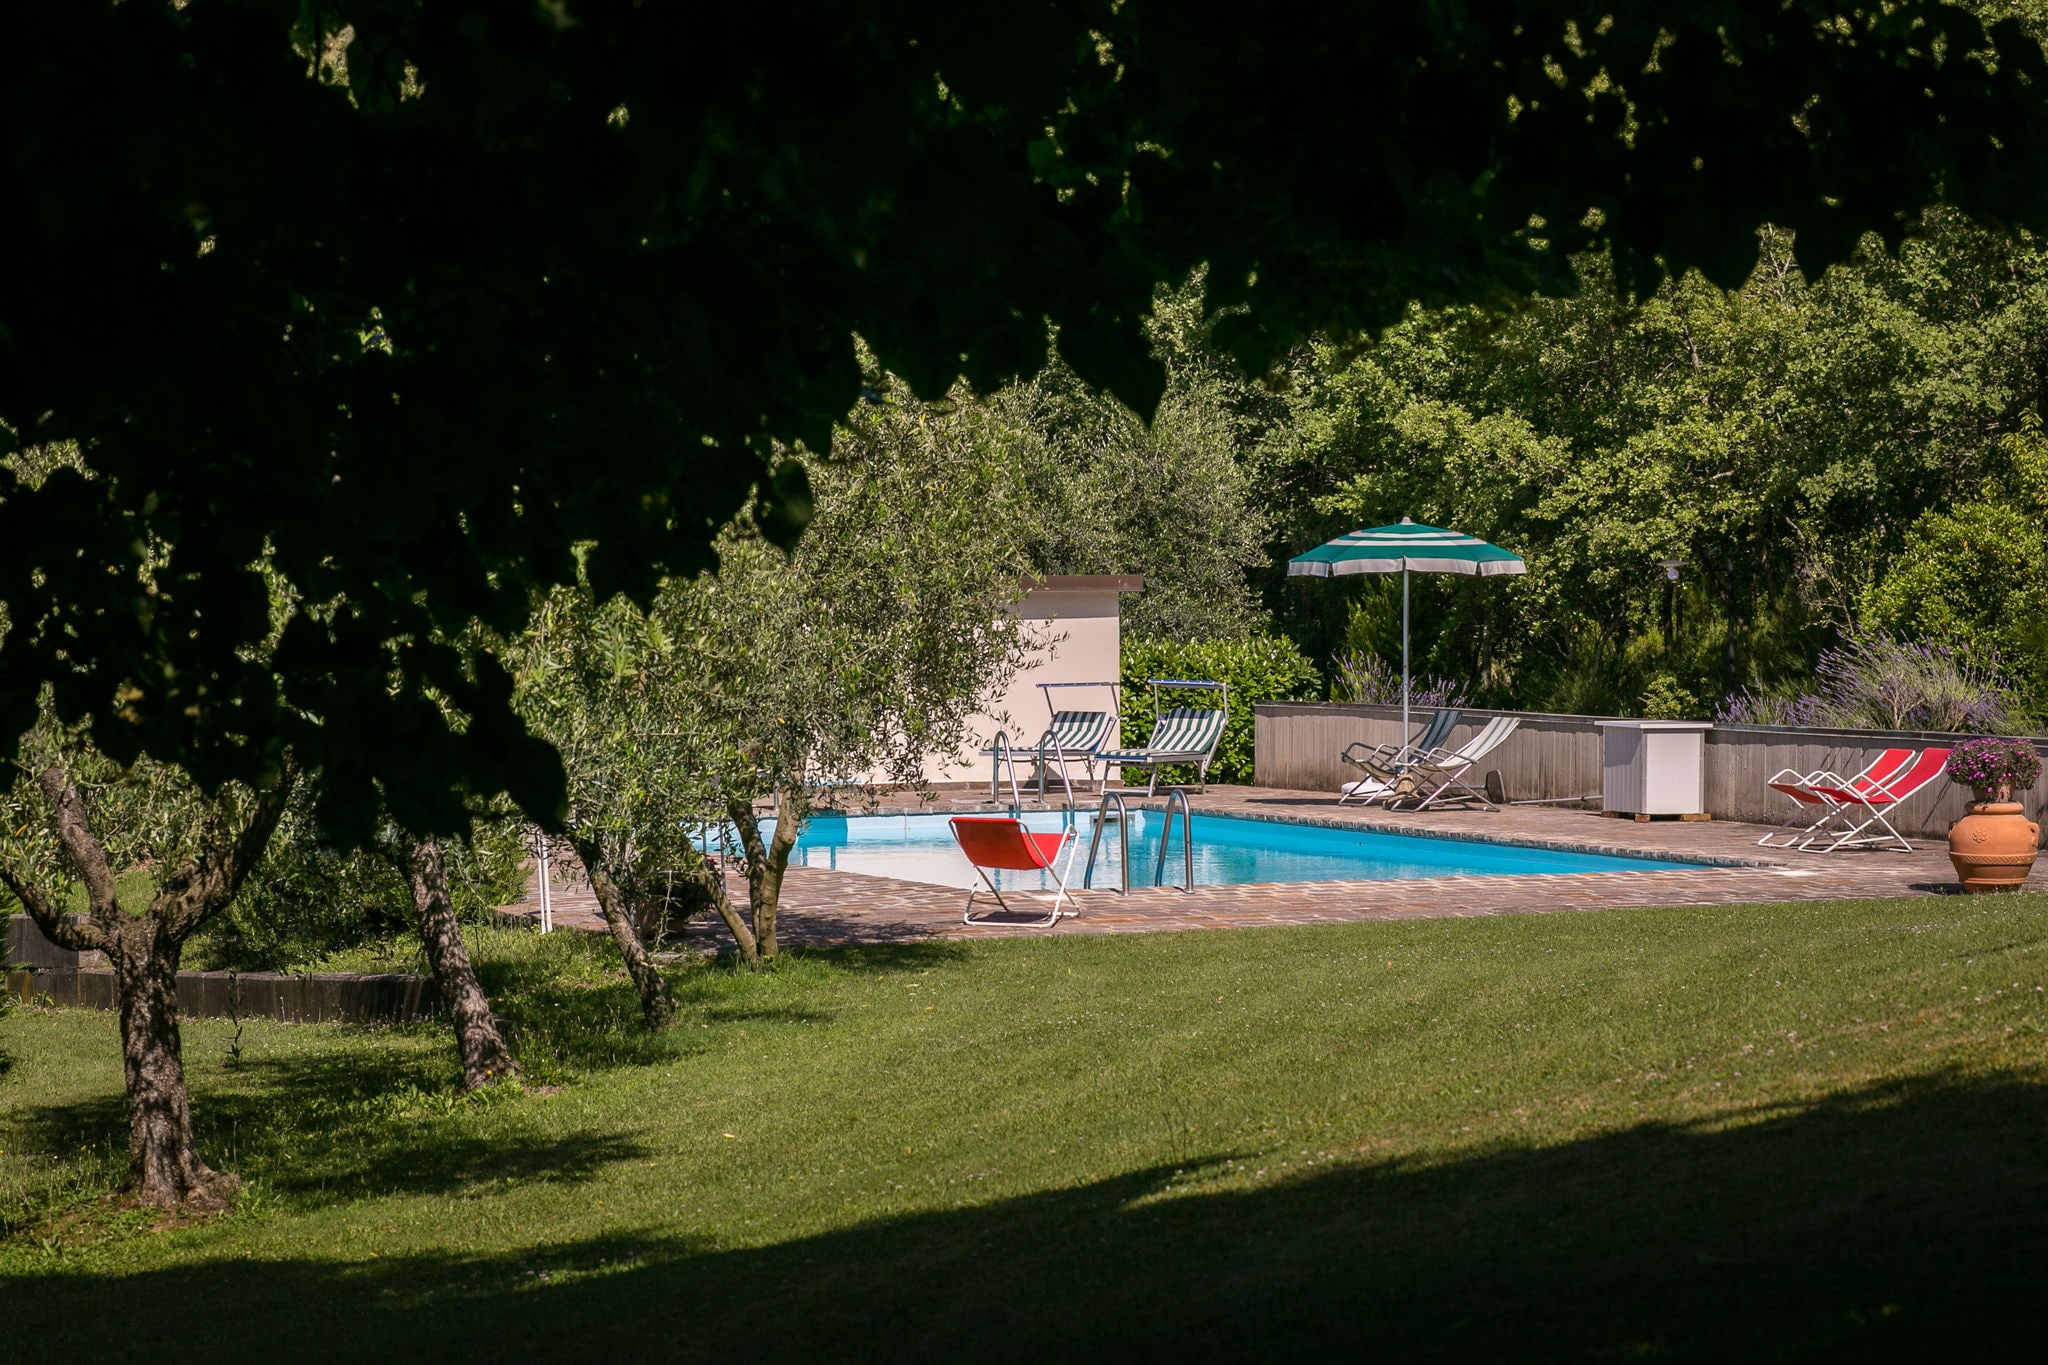 Villa on a hill with private pool, nice view, pizza oven and barbecue